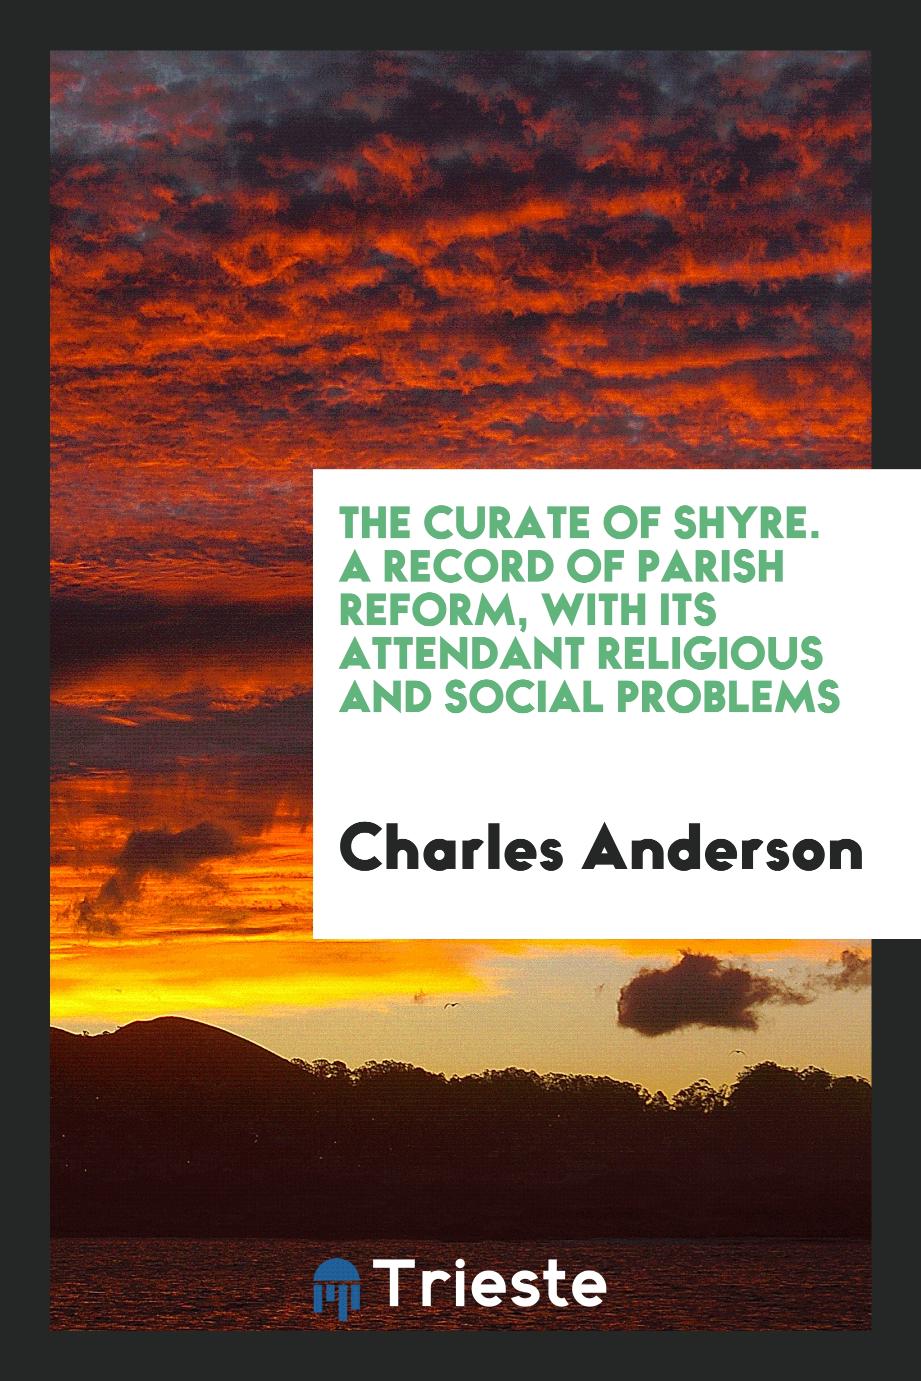 The Curate of Shyre. A Record of Parish Reform, with Its Attendant Religious and Social Problems